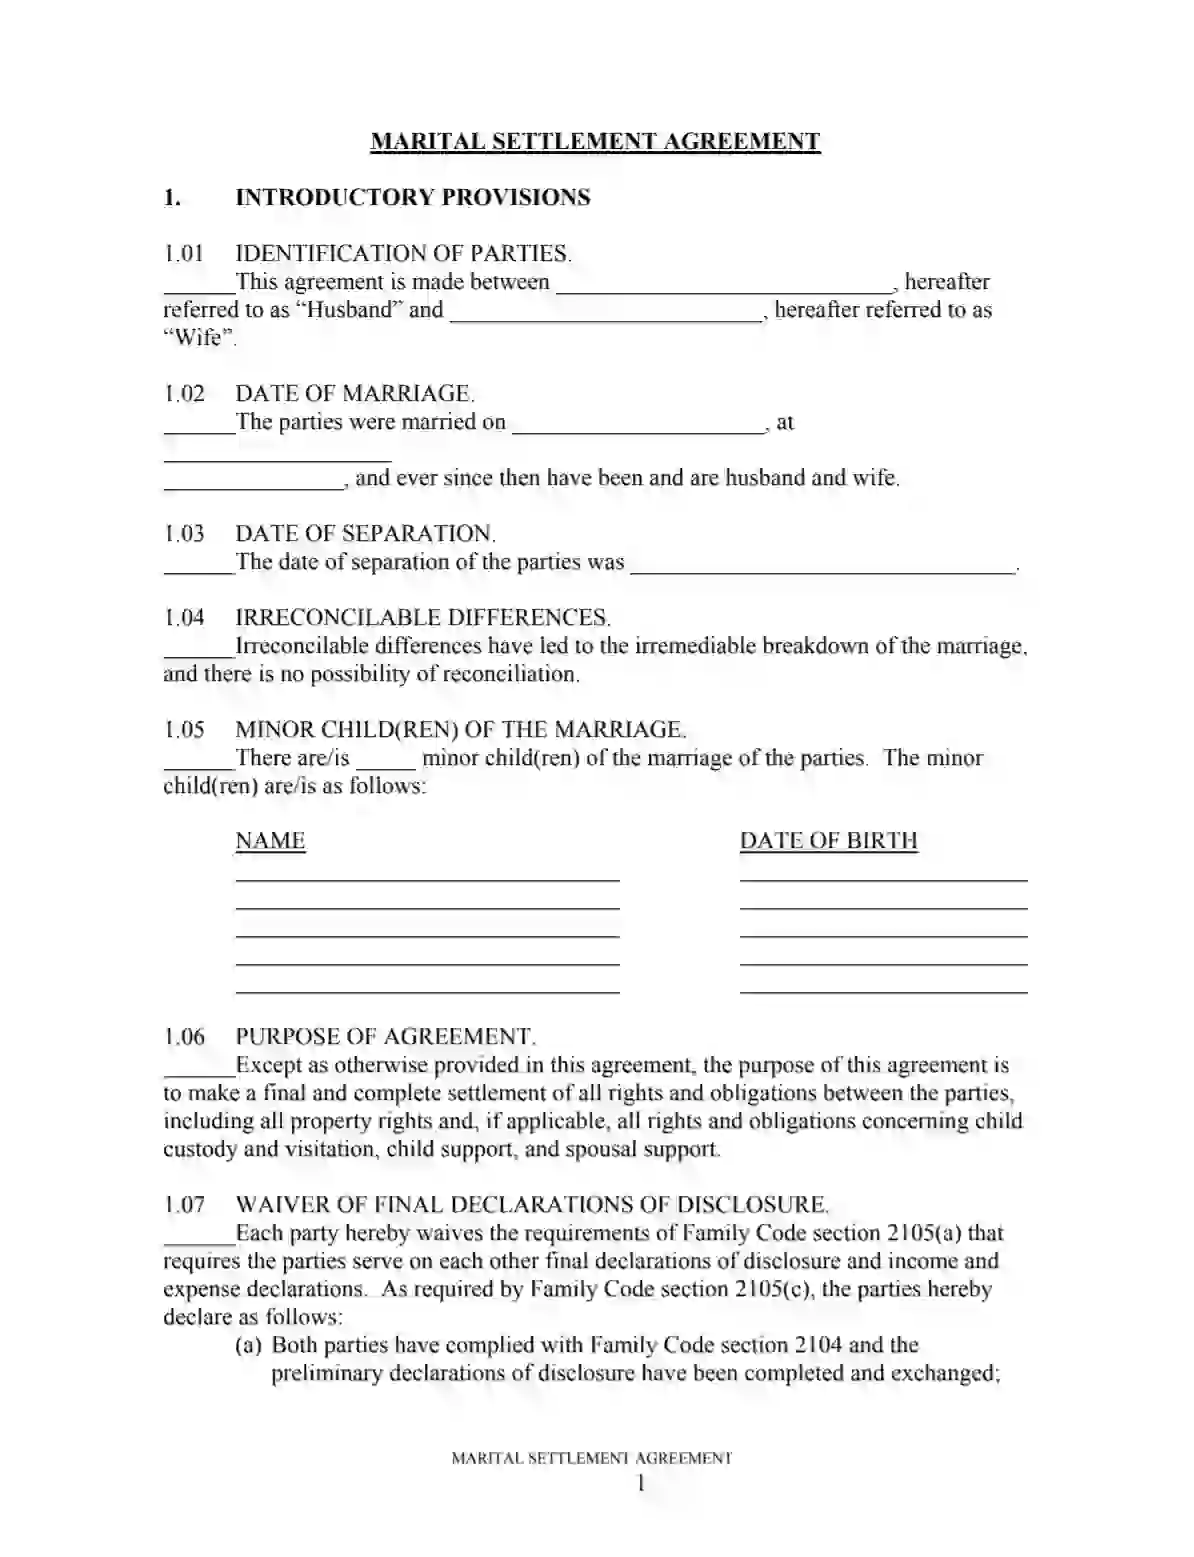 California Divorce (Marital) Settlement Agreement Form [PDF] For mutual child support agreement template